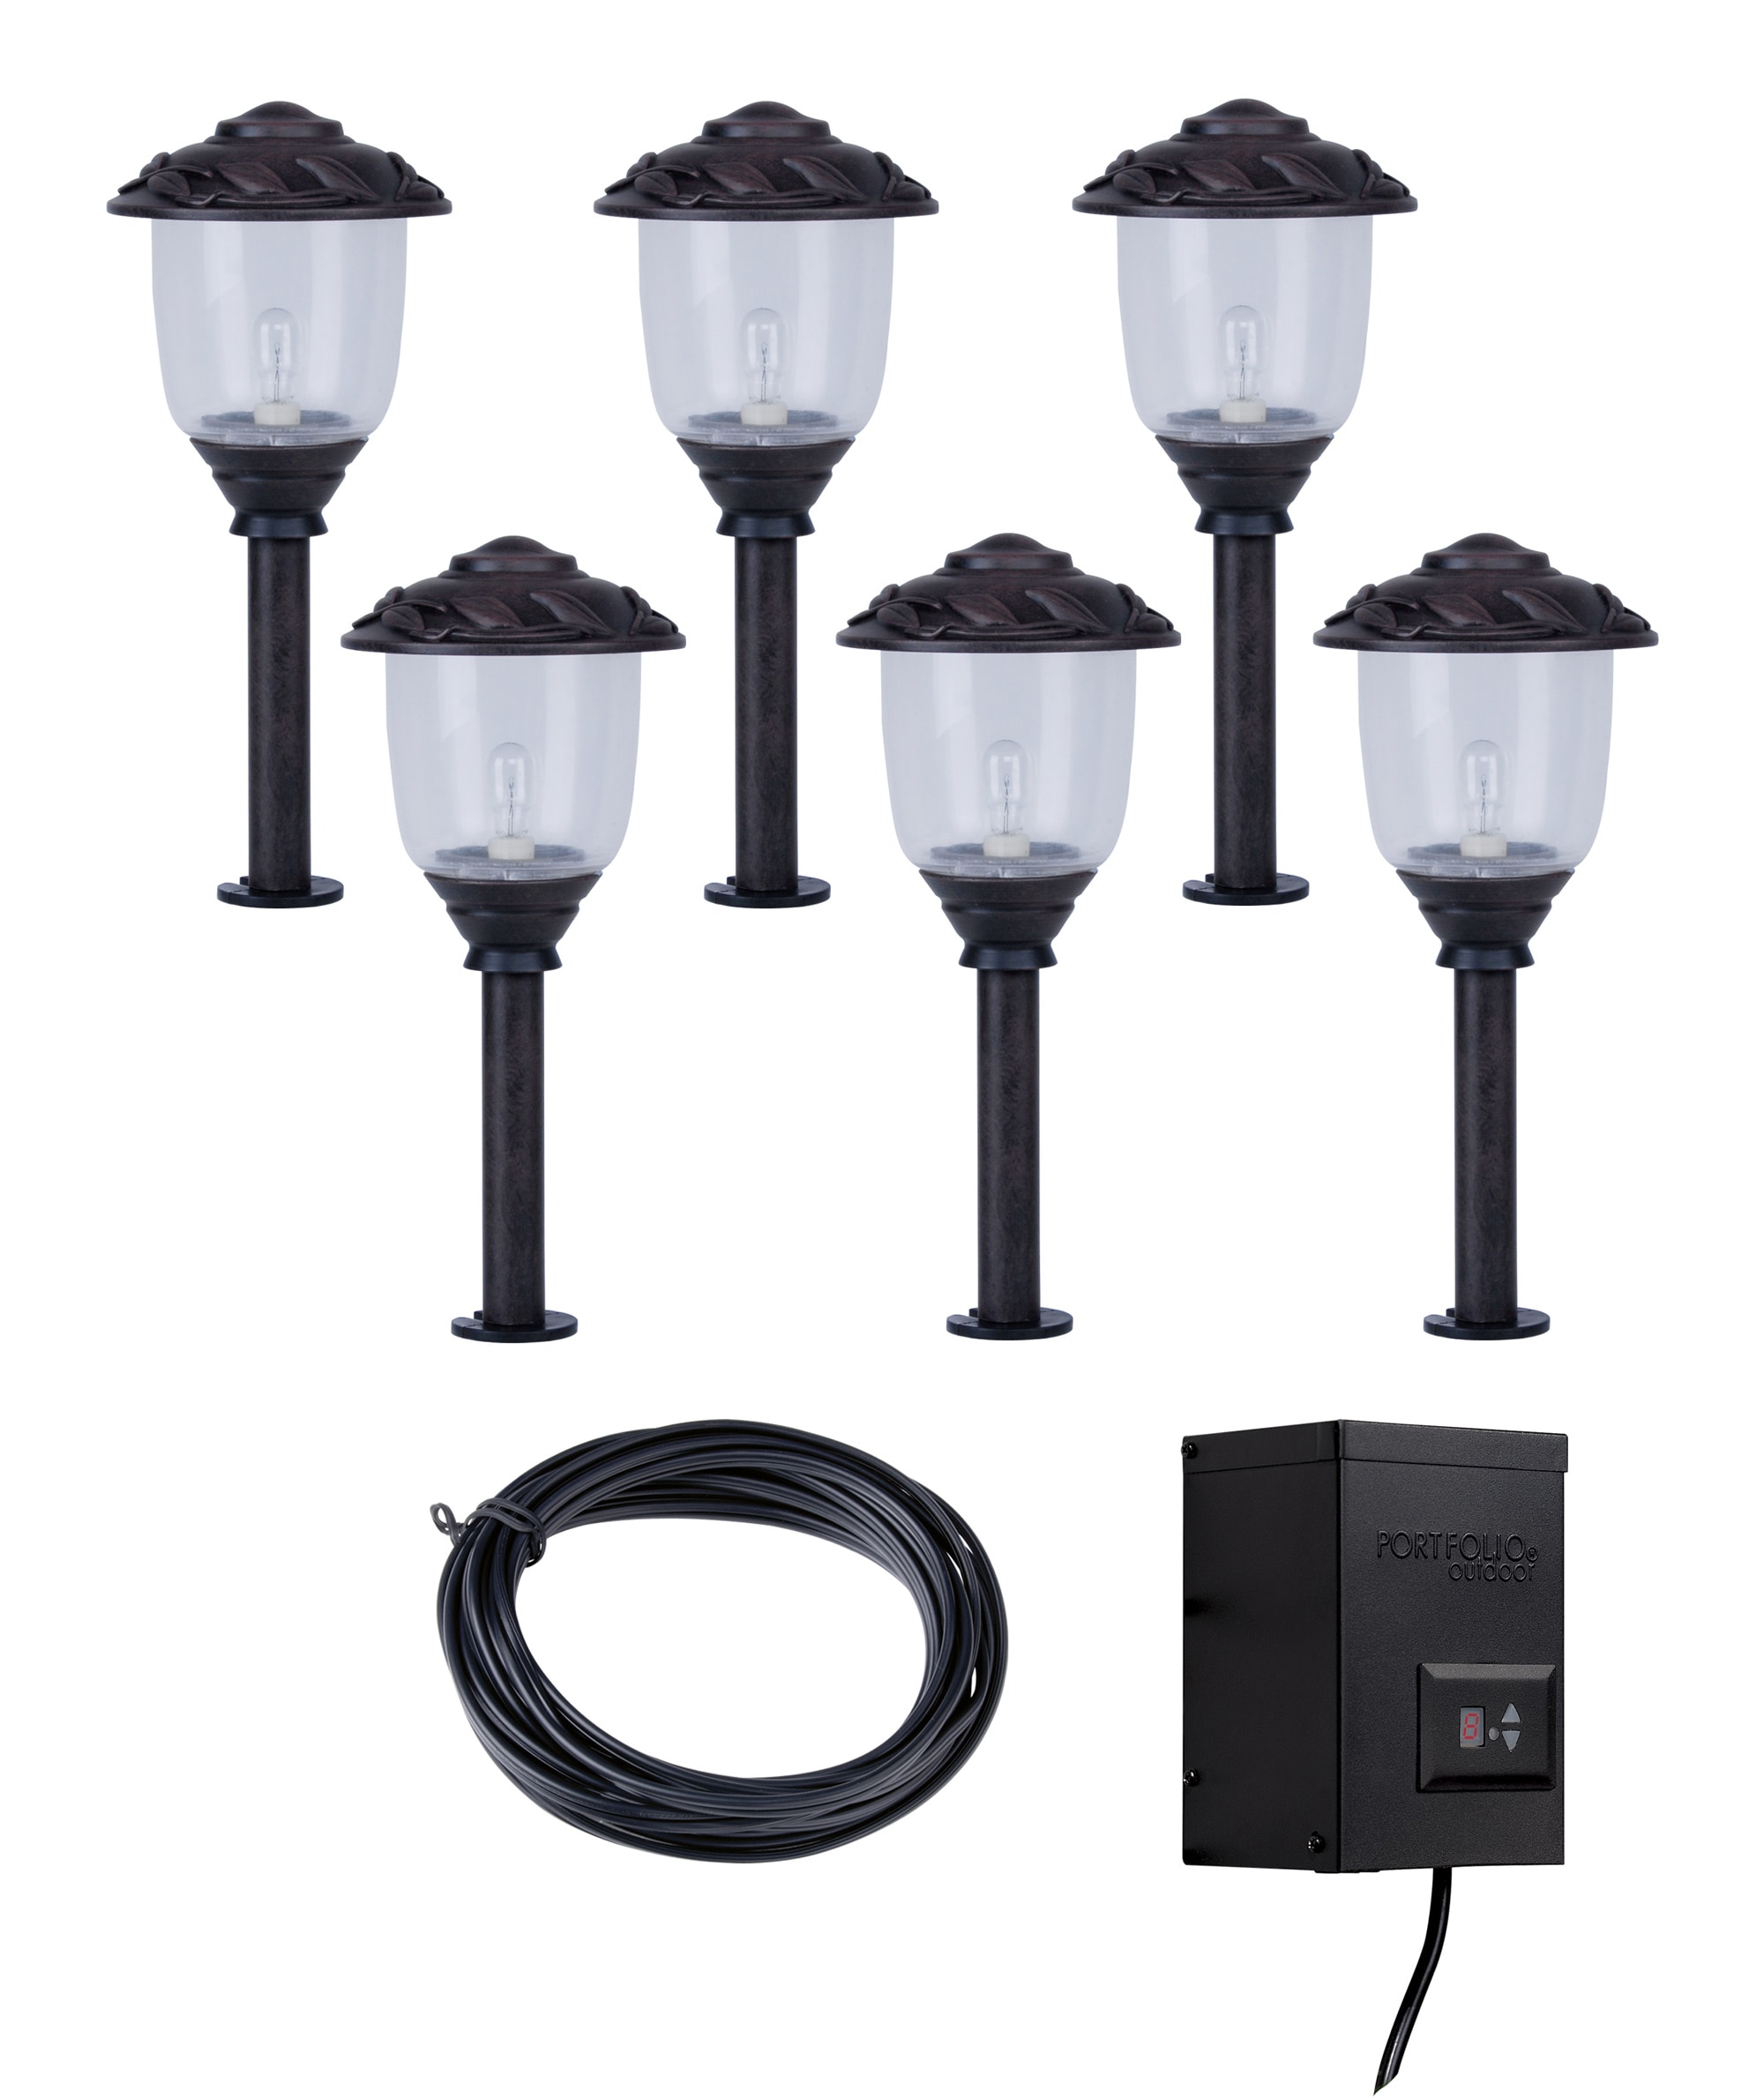 GreenLighting Low Voltage Outdoor Lights Cast Aluminum Path Stake and Spo - 3